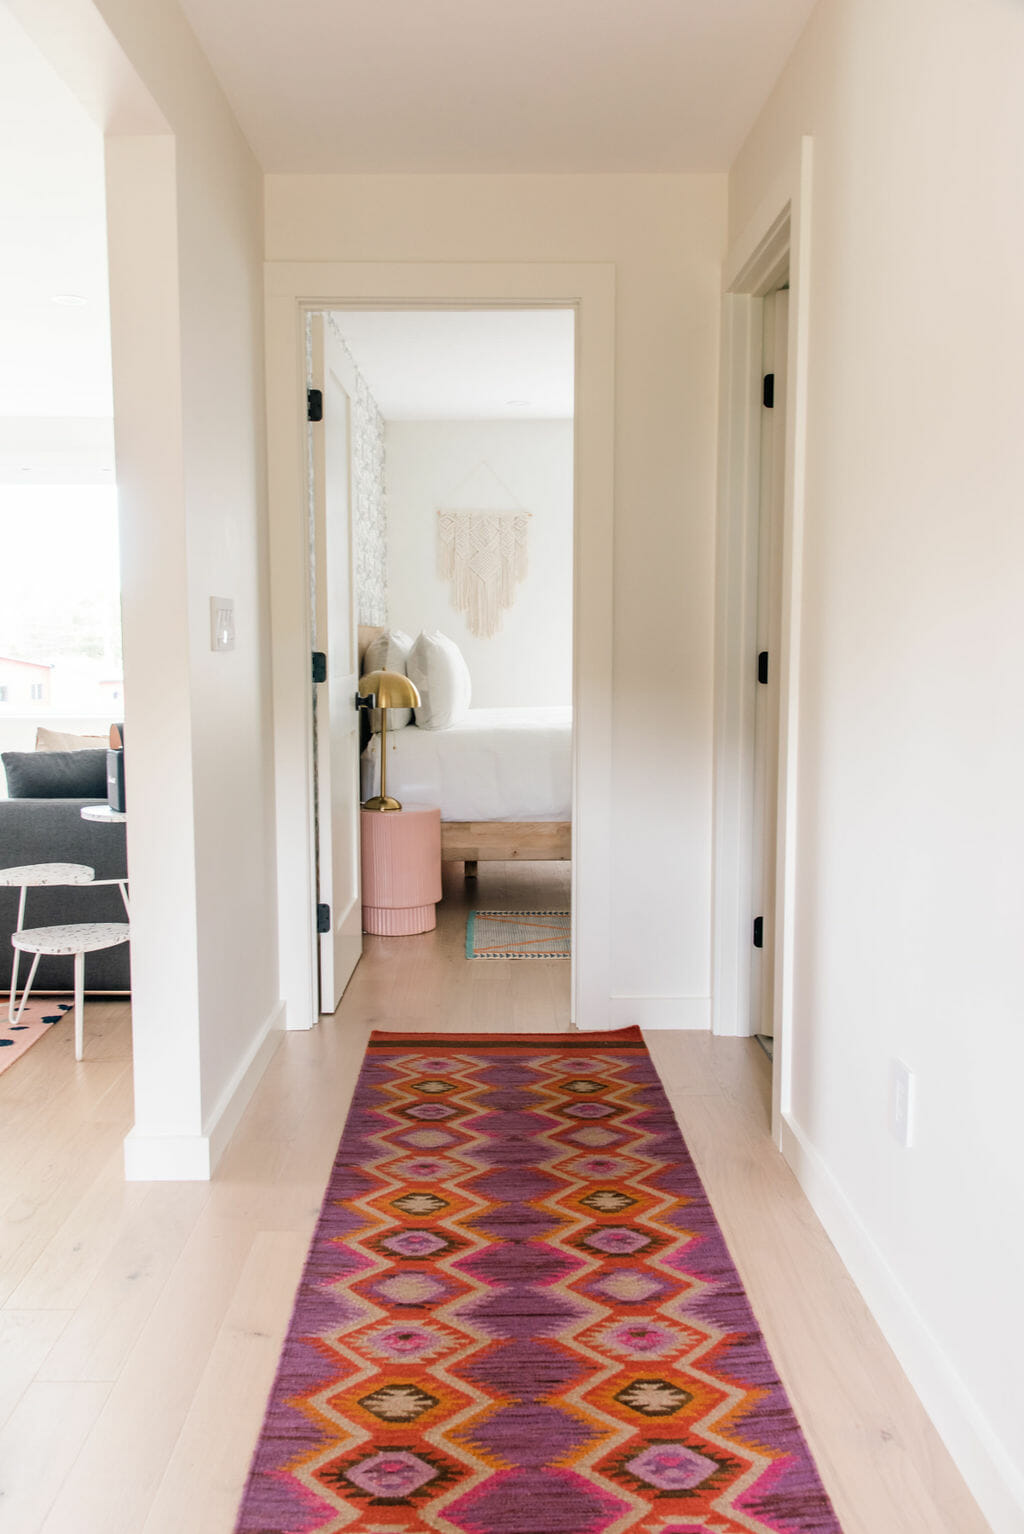 Hallway with red and orange patterned rug runner leading to bedroom.